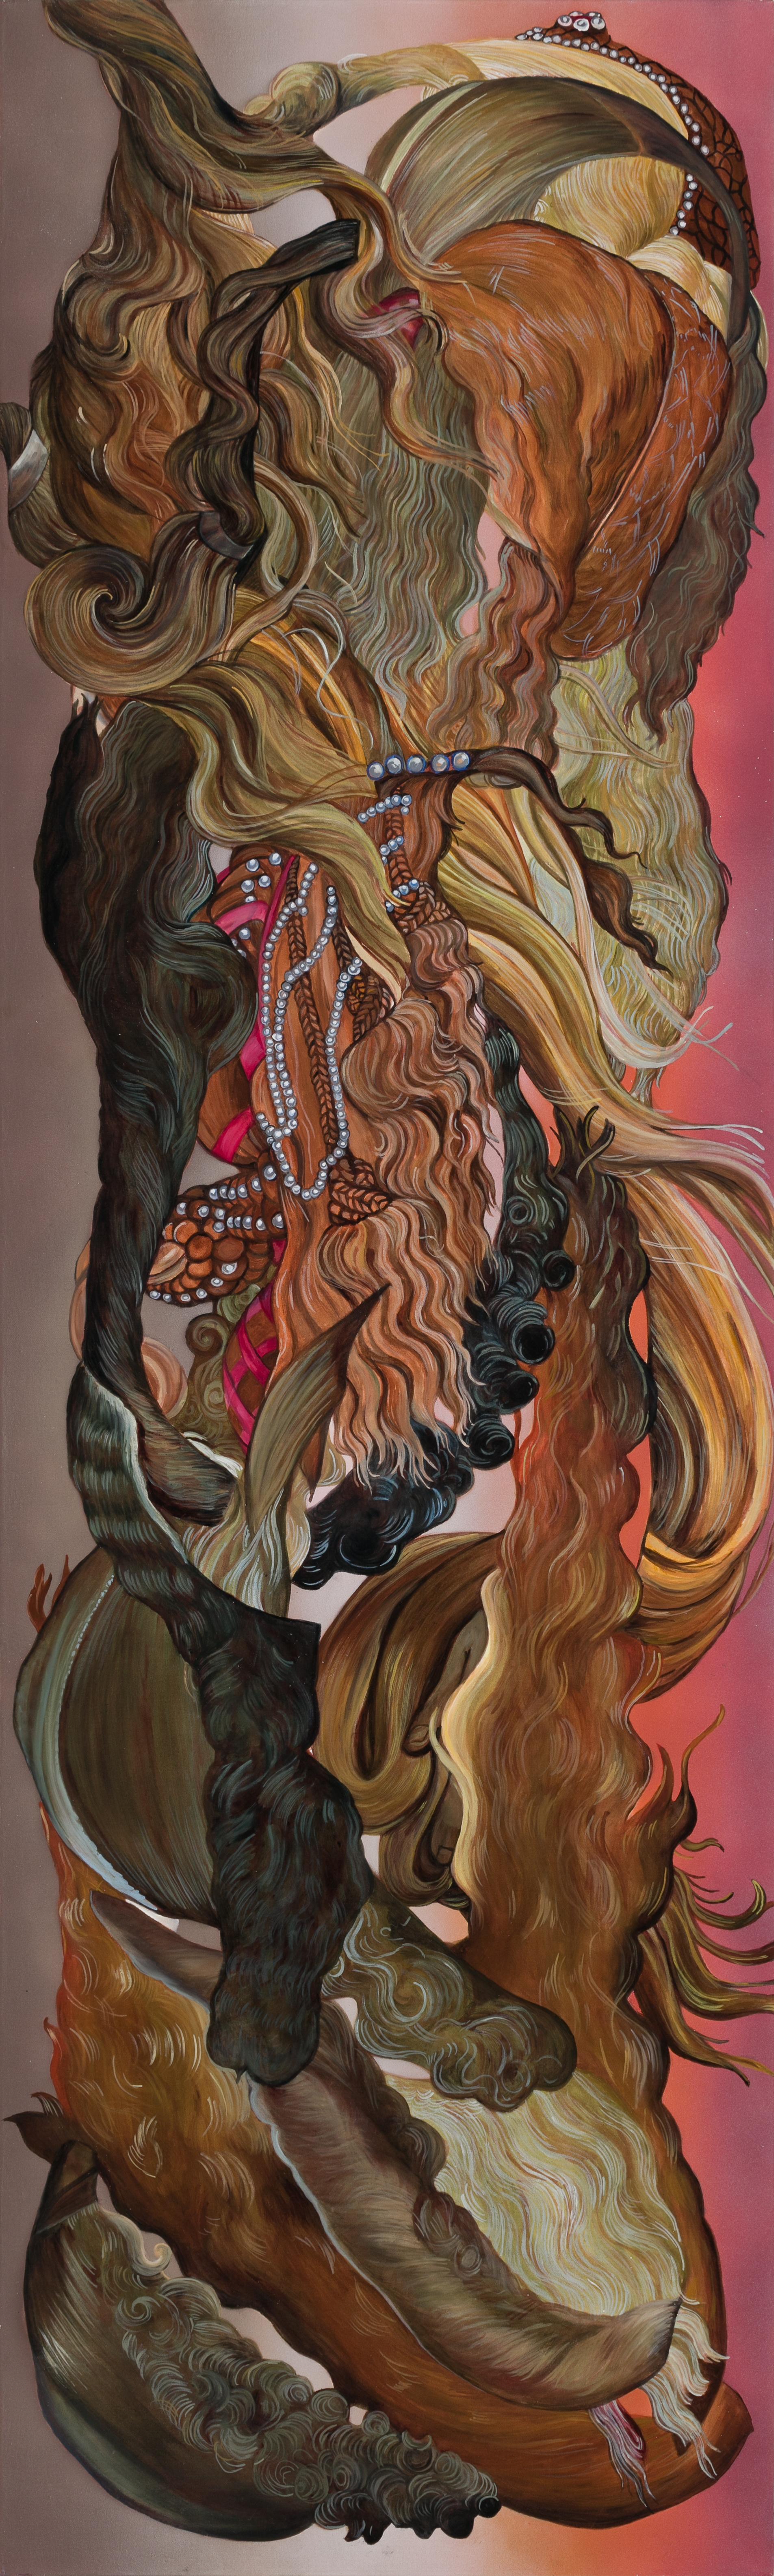 Make your hair stand on end  - Painting by Melissa Furness